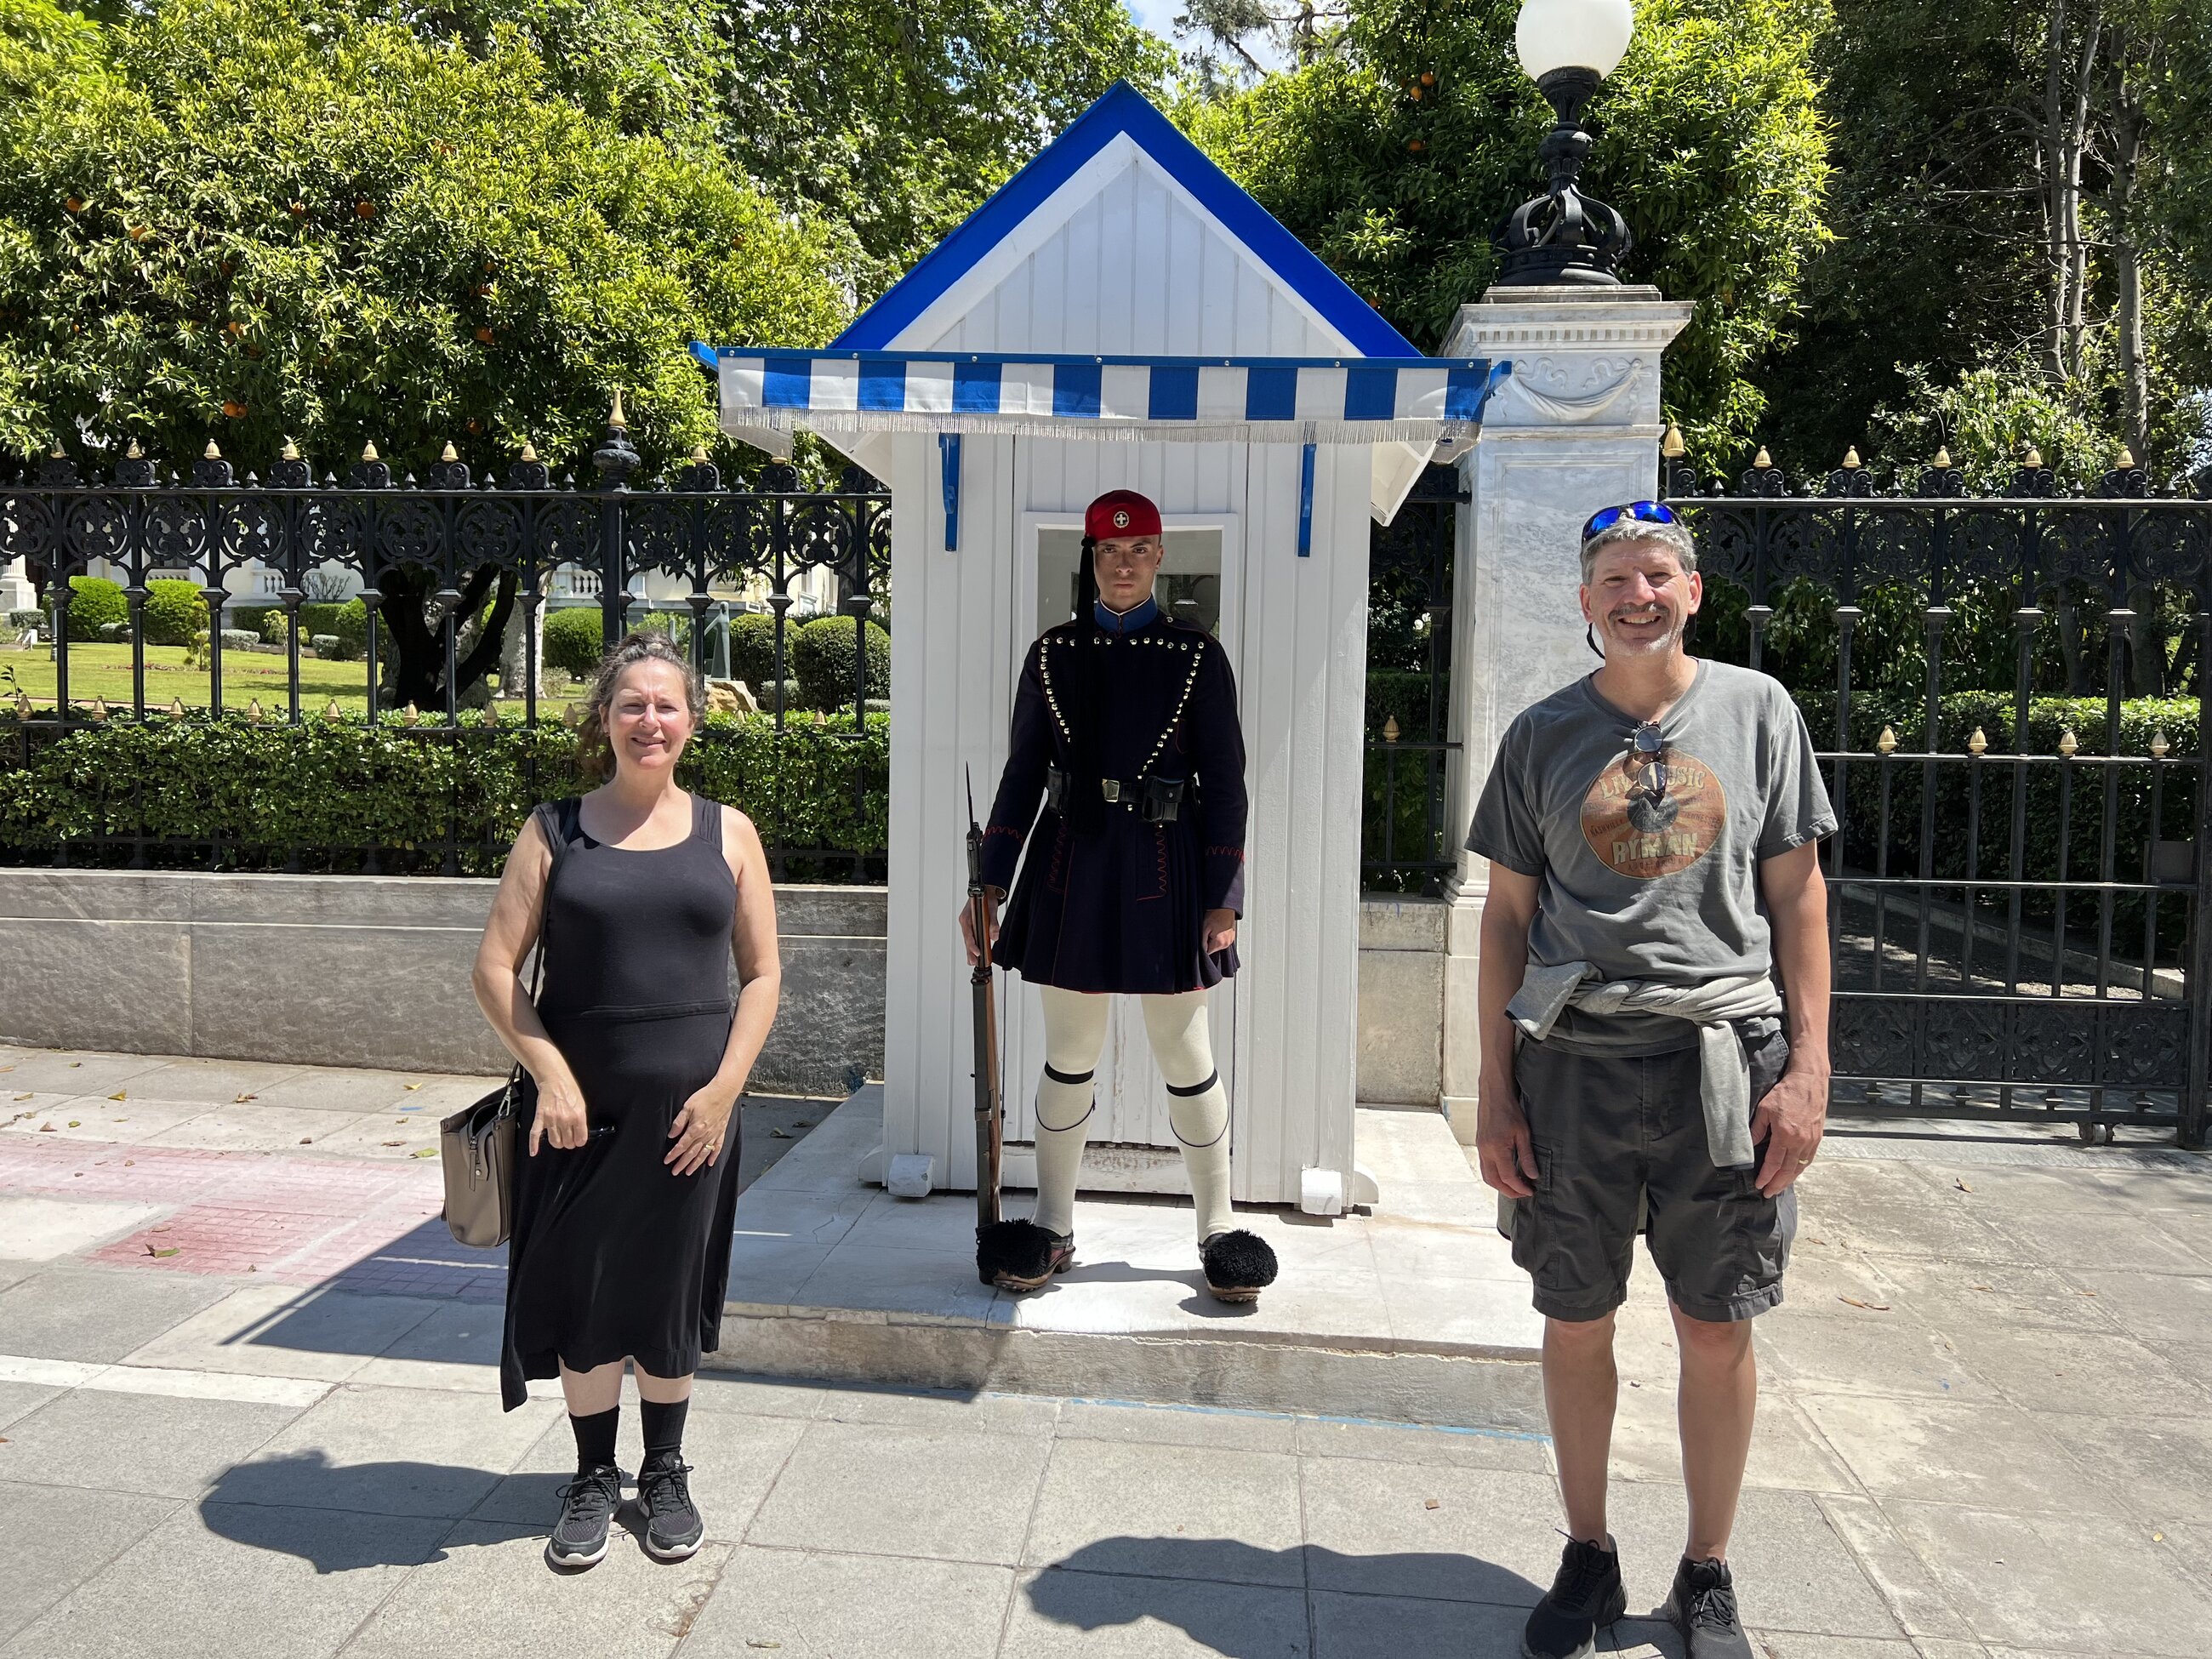 Standing with my husband Dave and Evanzones, a Greek Soldier, in front of the prime minister’s residence, in honor of the fallen soldiers who had given of their lives in all wars, particularly on European soil here.